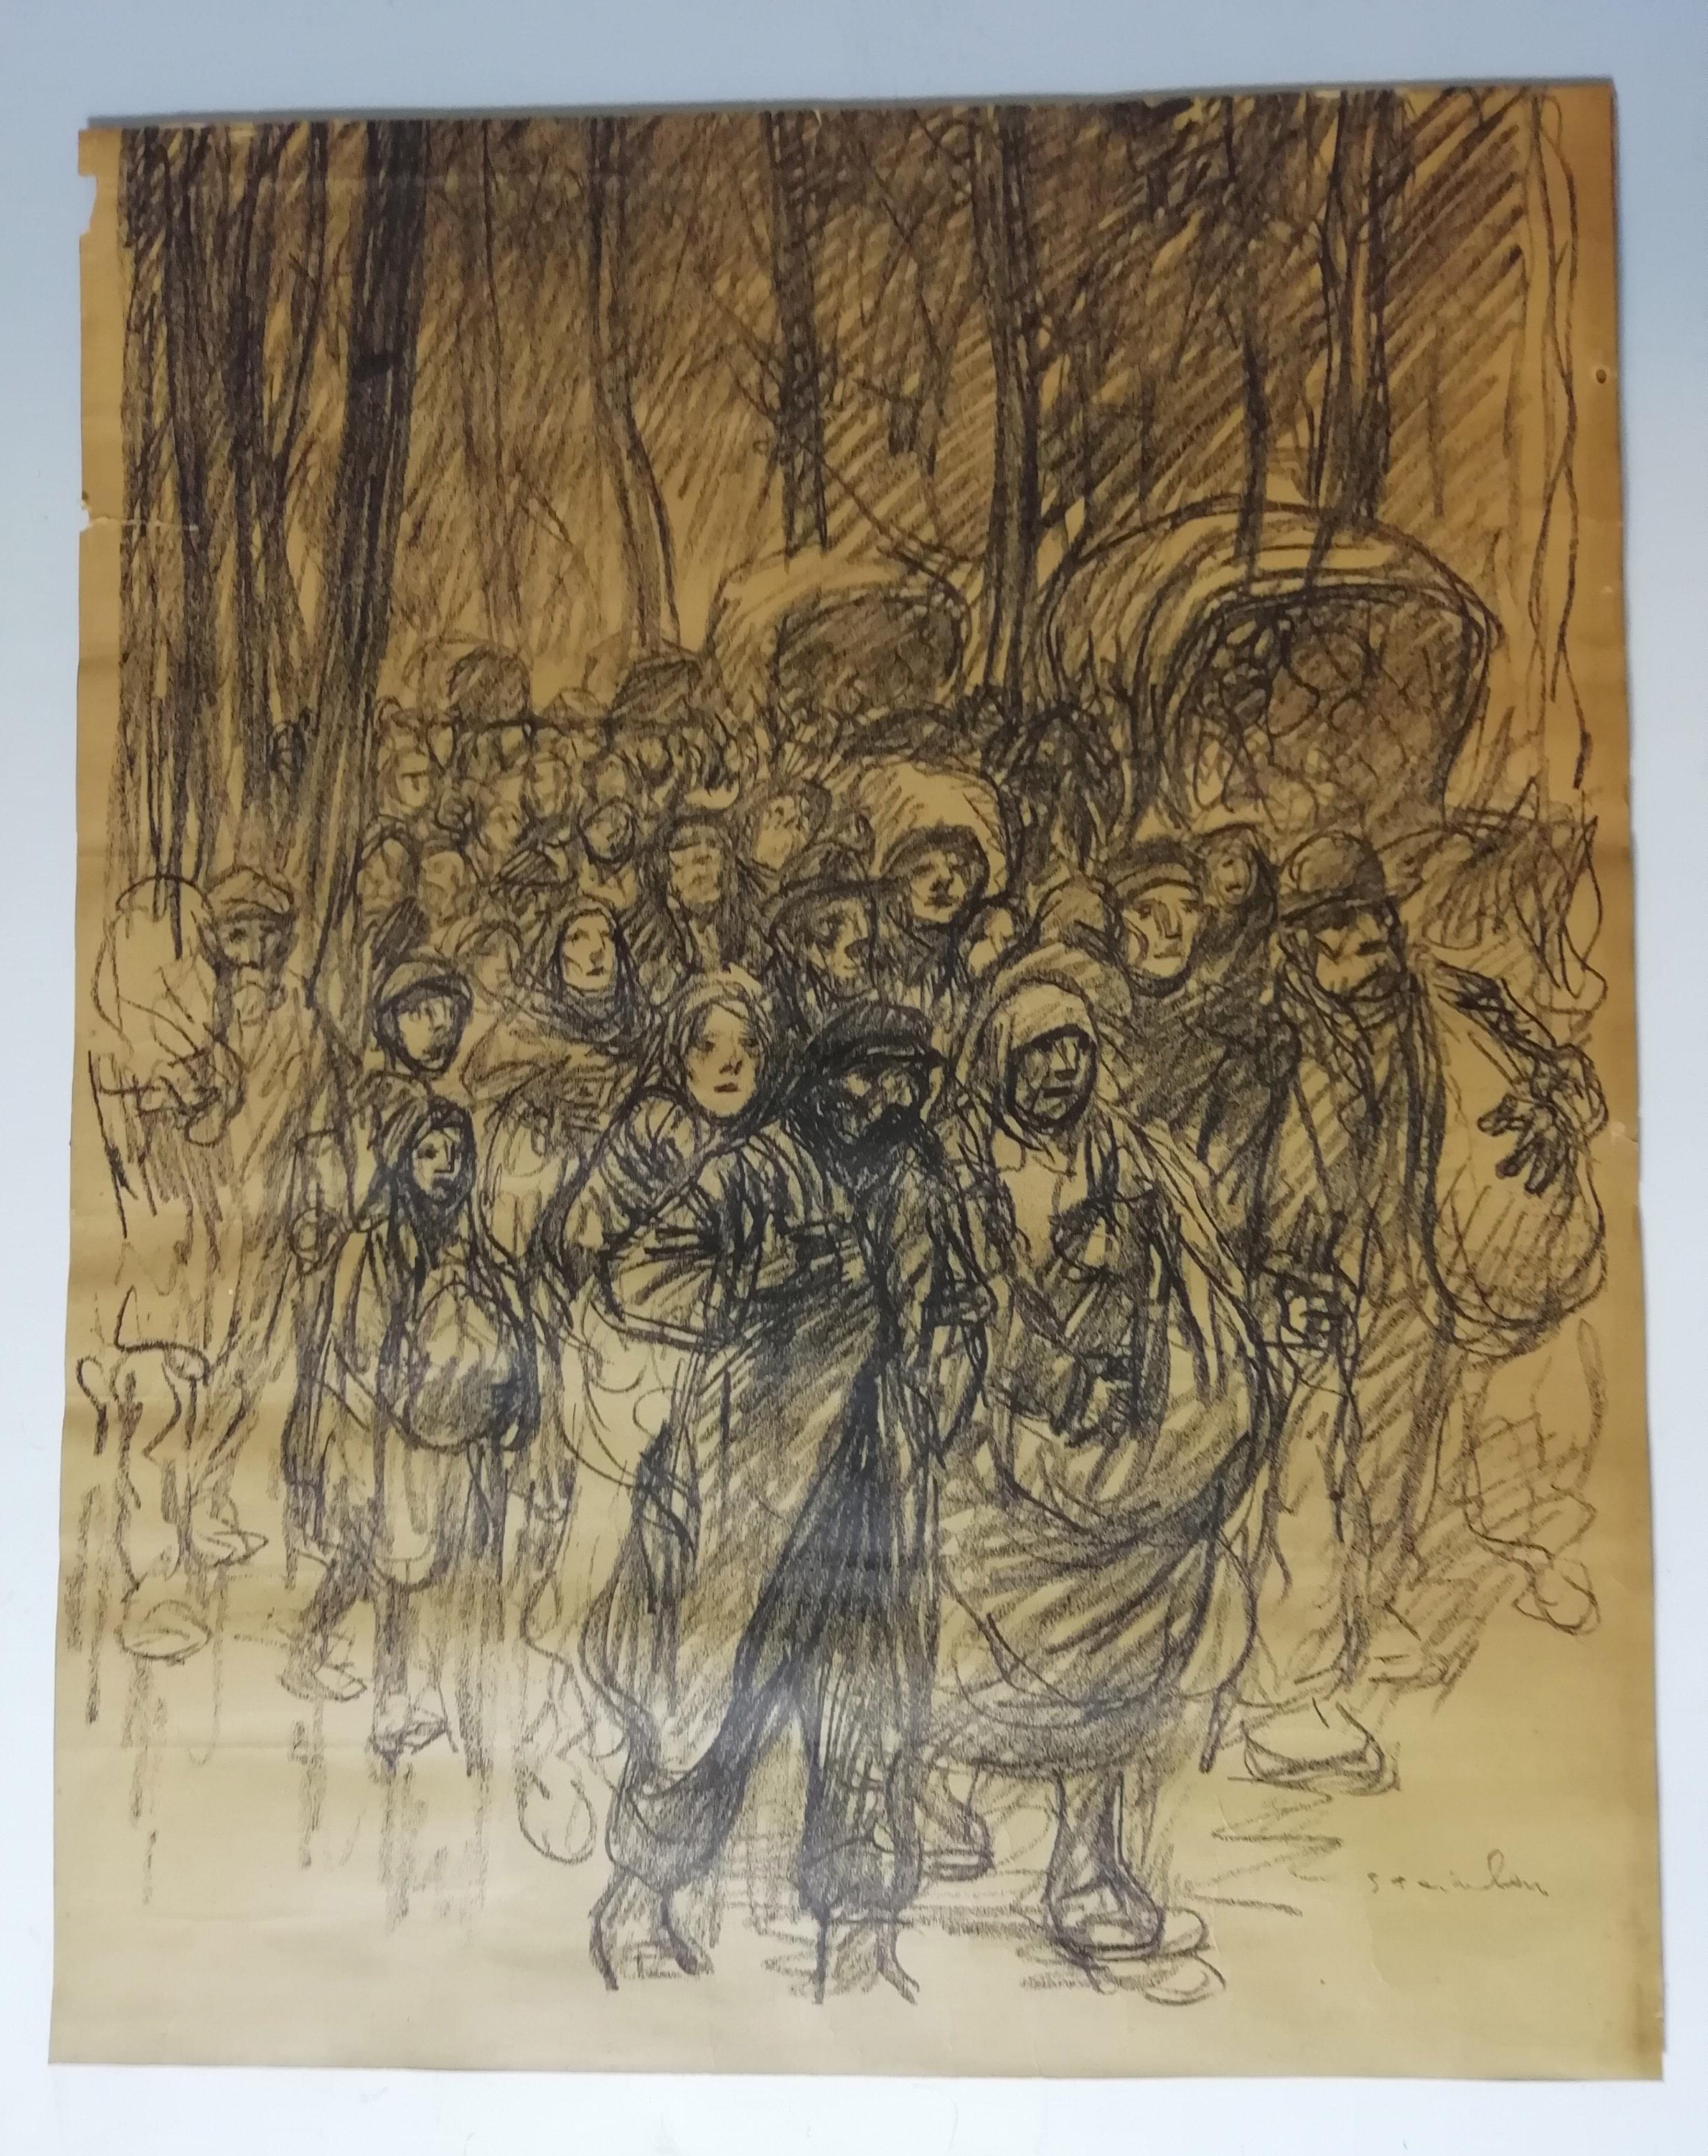 A original charcoal drawing on paper by Théophile Alexandre Steinlen Serbian civilians and soldiers as they head into the mountains

Medium: Charcoal on paper

Signed right corner

Actual size size 49 x 40 cm

Frame 55 x 46 cm

Condition: Small tear